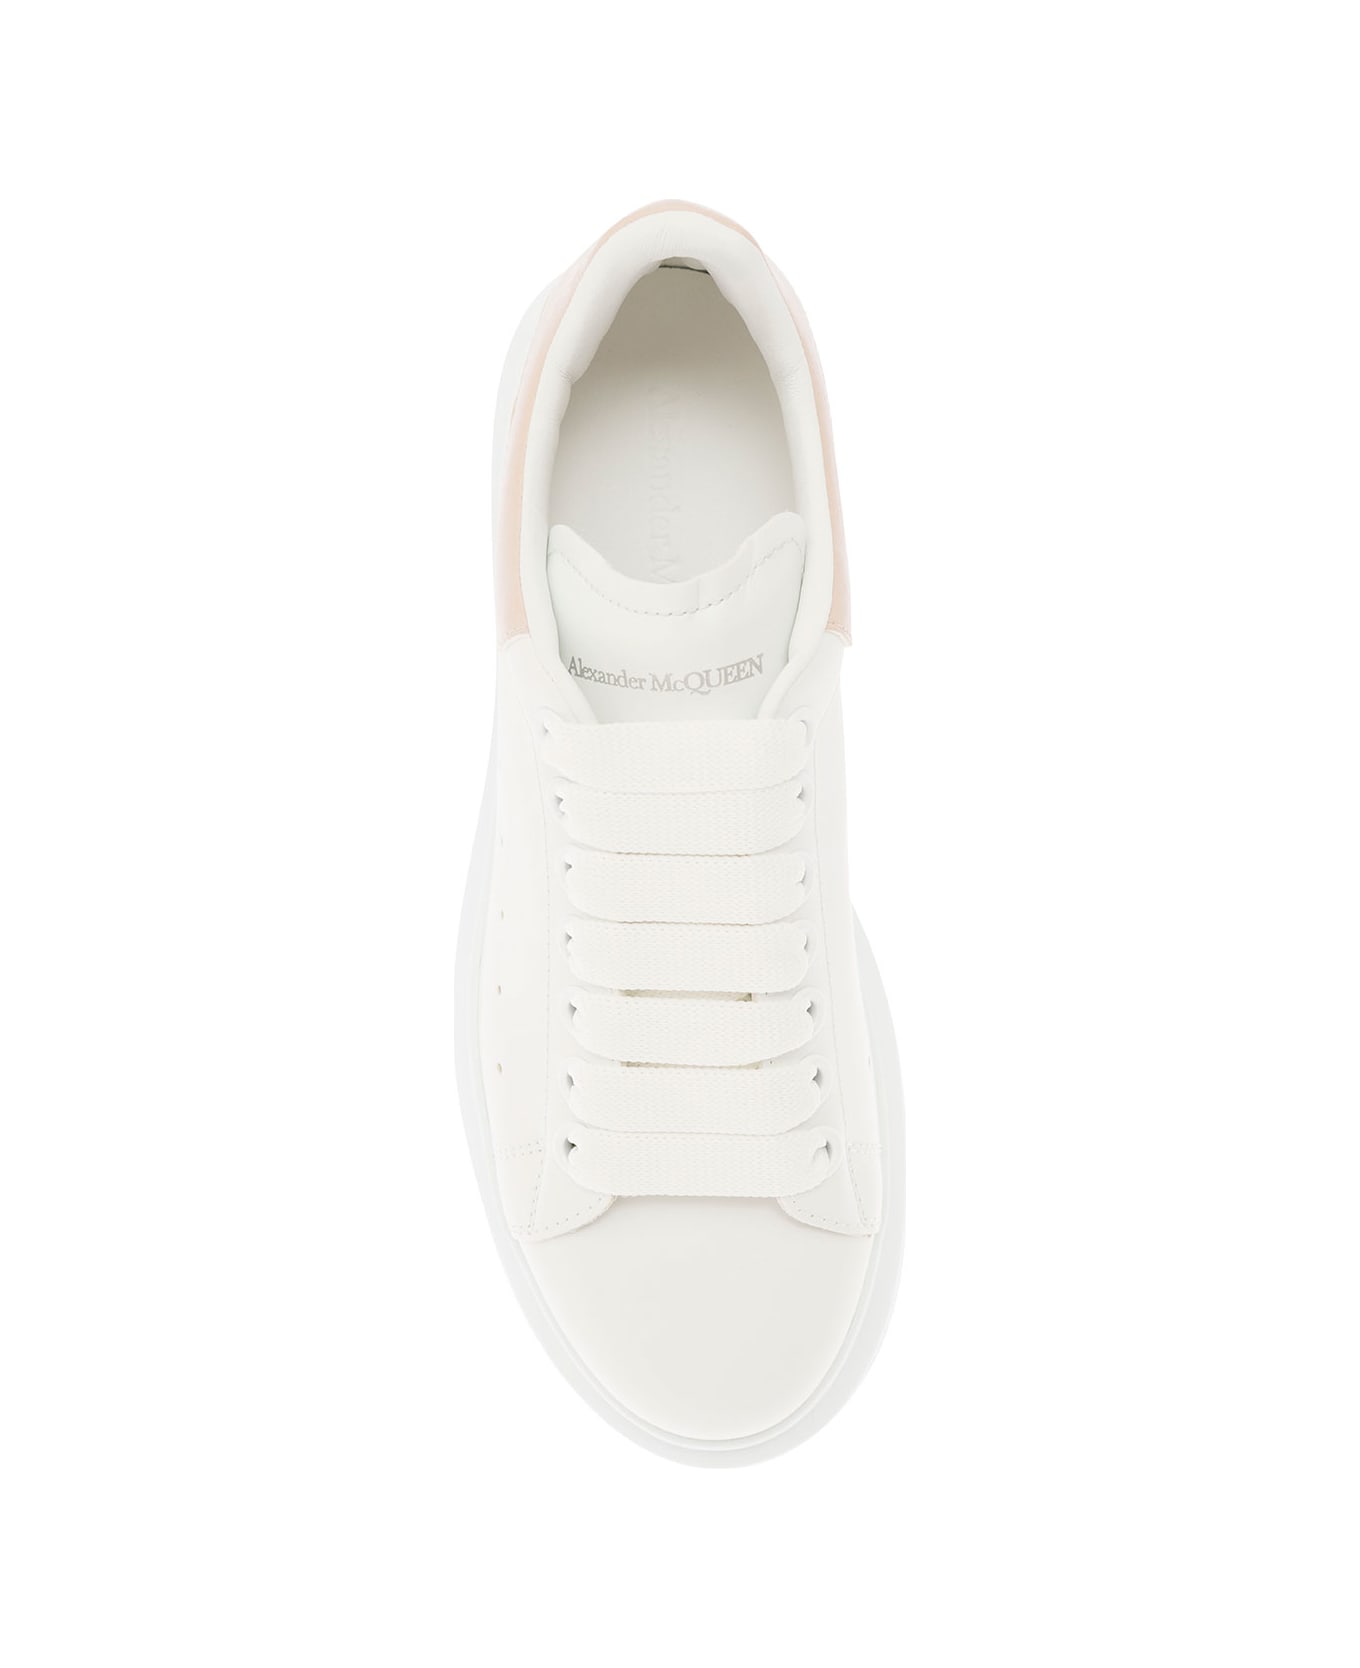 Alexander McQueen White Low Top Sneakers With Oversized Platform In Leather Woman - White ウェッジシューズ